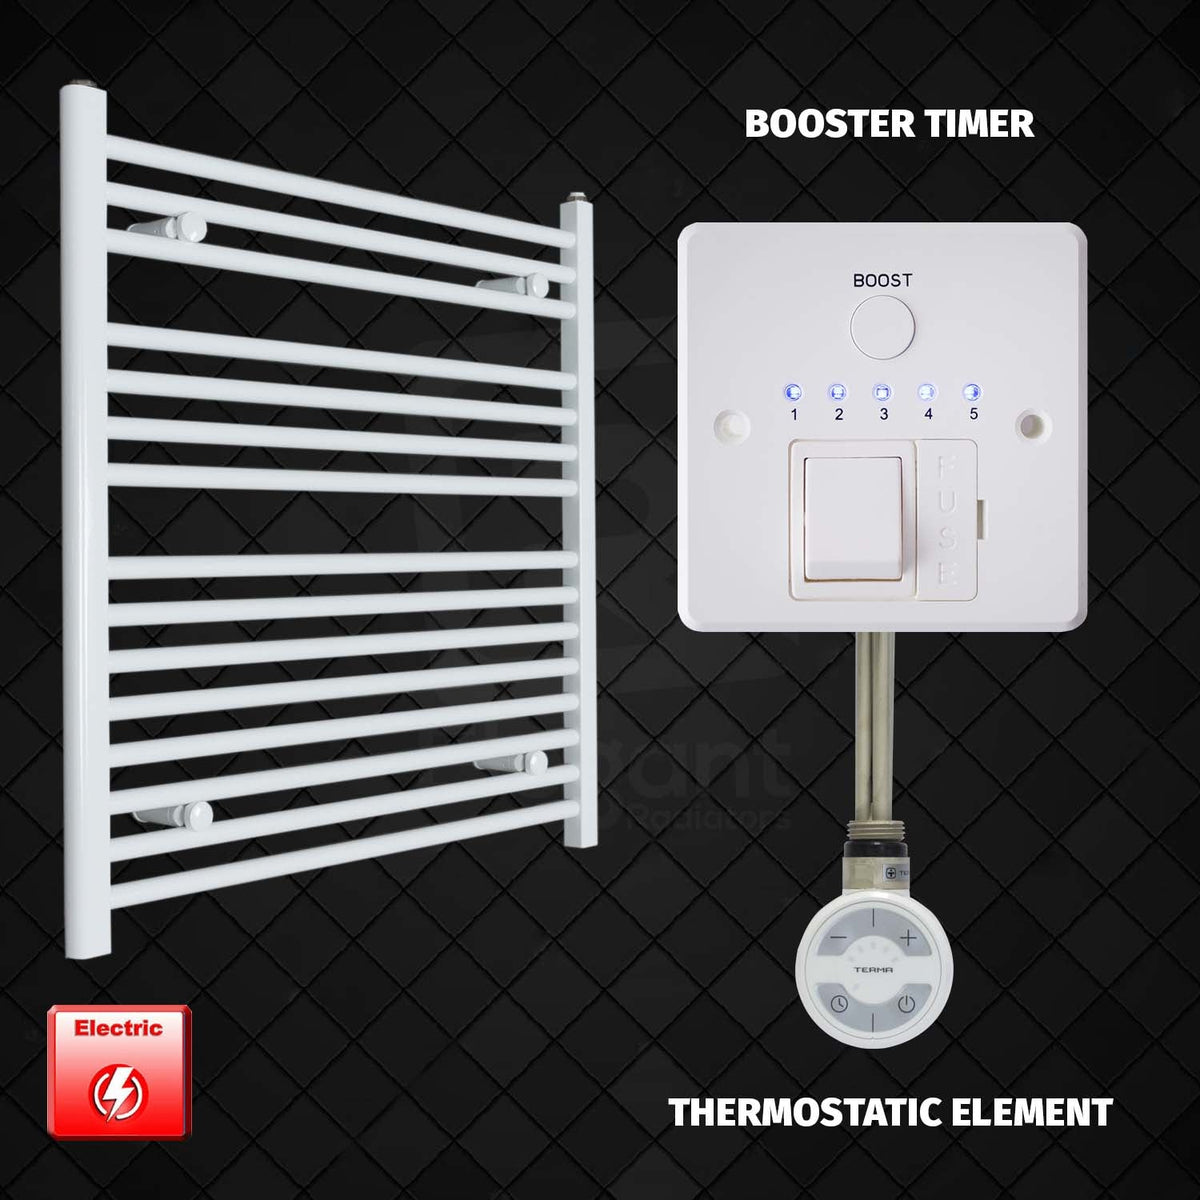 800 mm High 750 mm Wide Pre-Filled Electric Heated Towel Rail Radiator White HTR MOA Thermostatic element booster timer